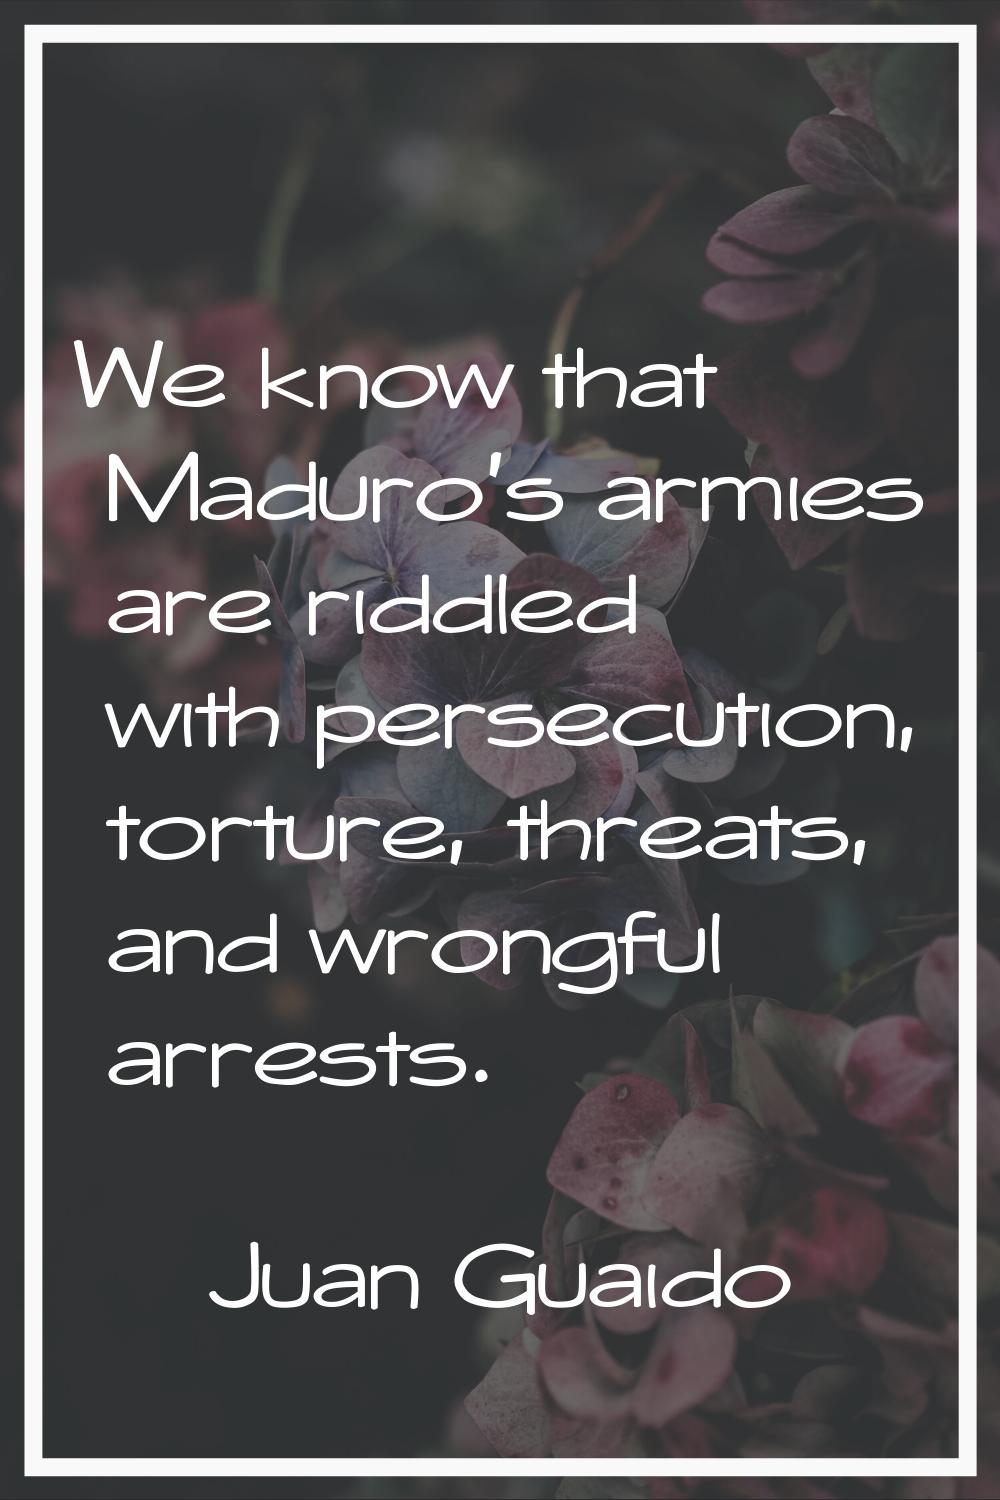 We know that Maduro's armies are riddled with persecution, torture, threats, and wrongful arrests.